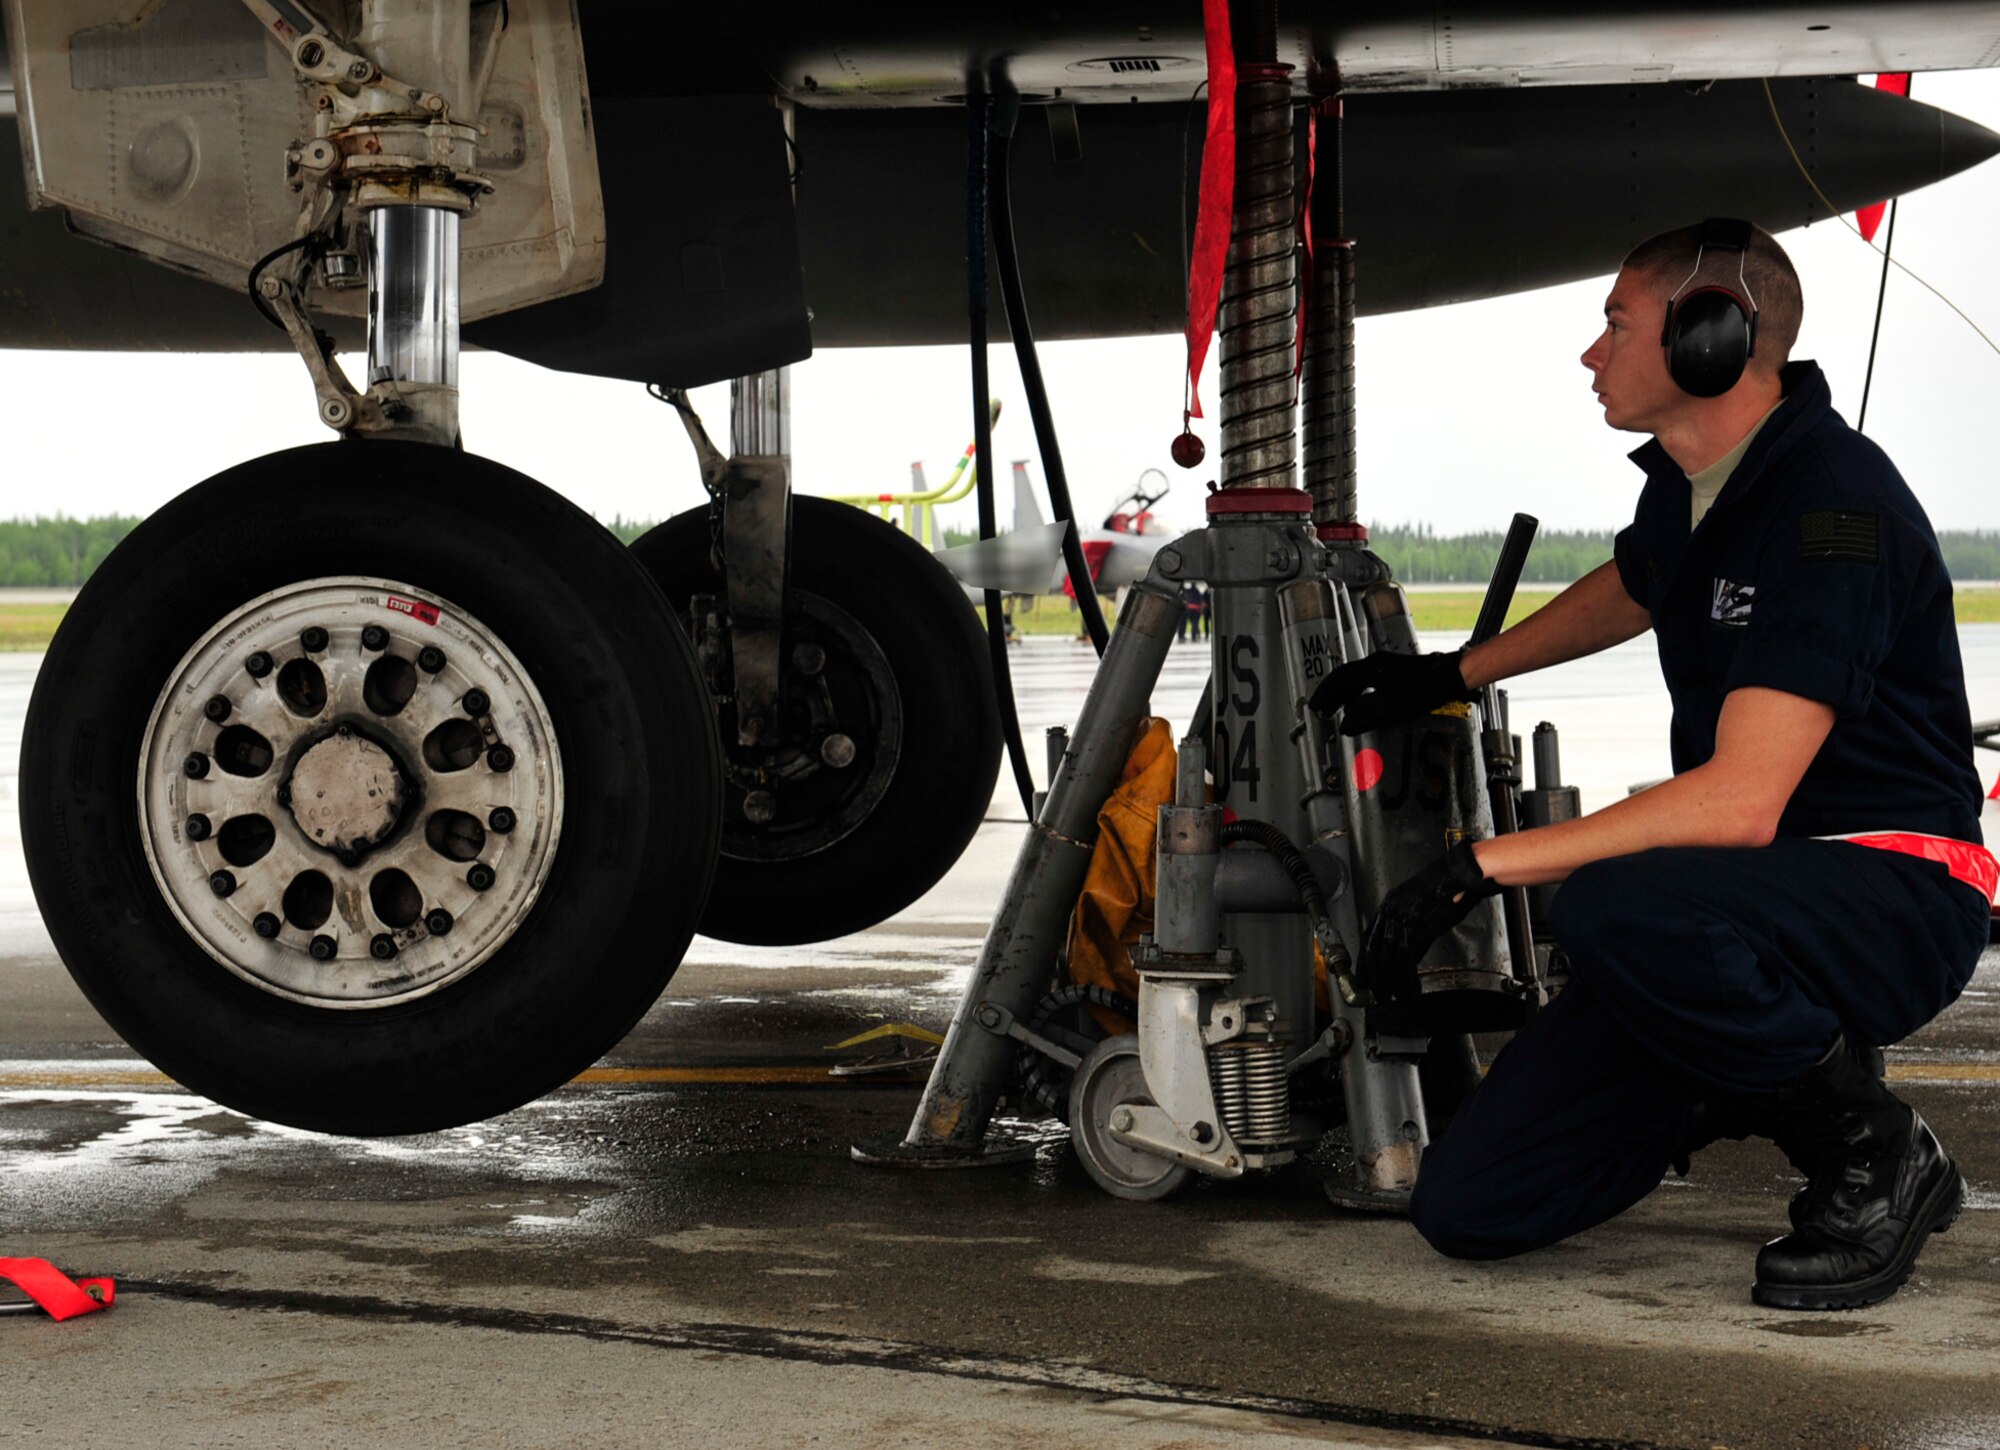 U.S. Air Force Senior Airman Greg Wright, a crew chief with the 18th Aircraft Maintenance, Kadena Air Base, Japan, performs a landing gear operations check on an F-15 Eagle during the Northern Edge Premier Joint Training Exercise at Eielson Air Force Base, Alaska, June 20. More than 1,000 personnel have been deployed to Alaska for the exercise and are established at the foremost Alaskan Army and Air Force installations. (U.S. Air Force photo/ Staff Sgt. Lakisha A. Croley)